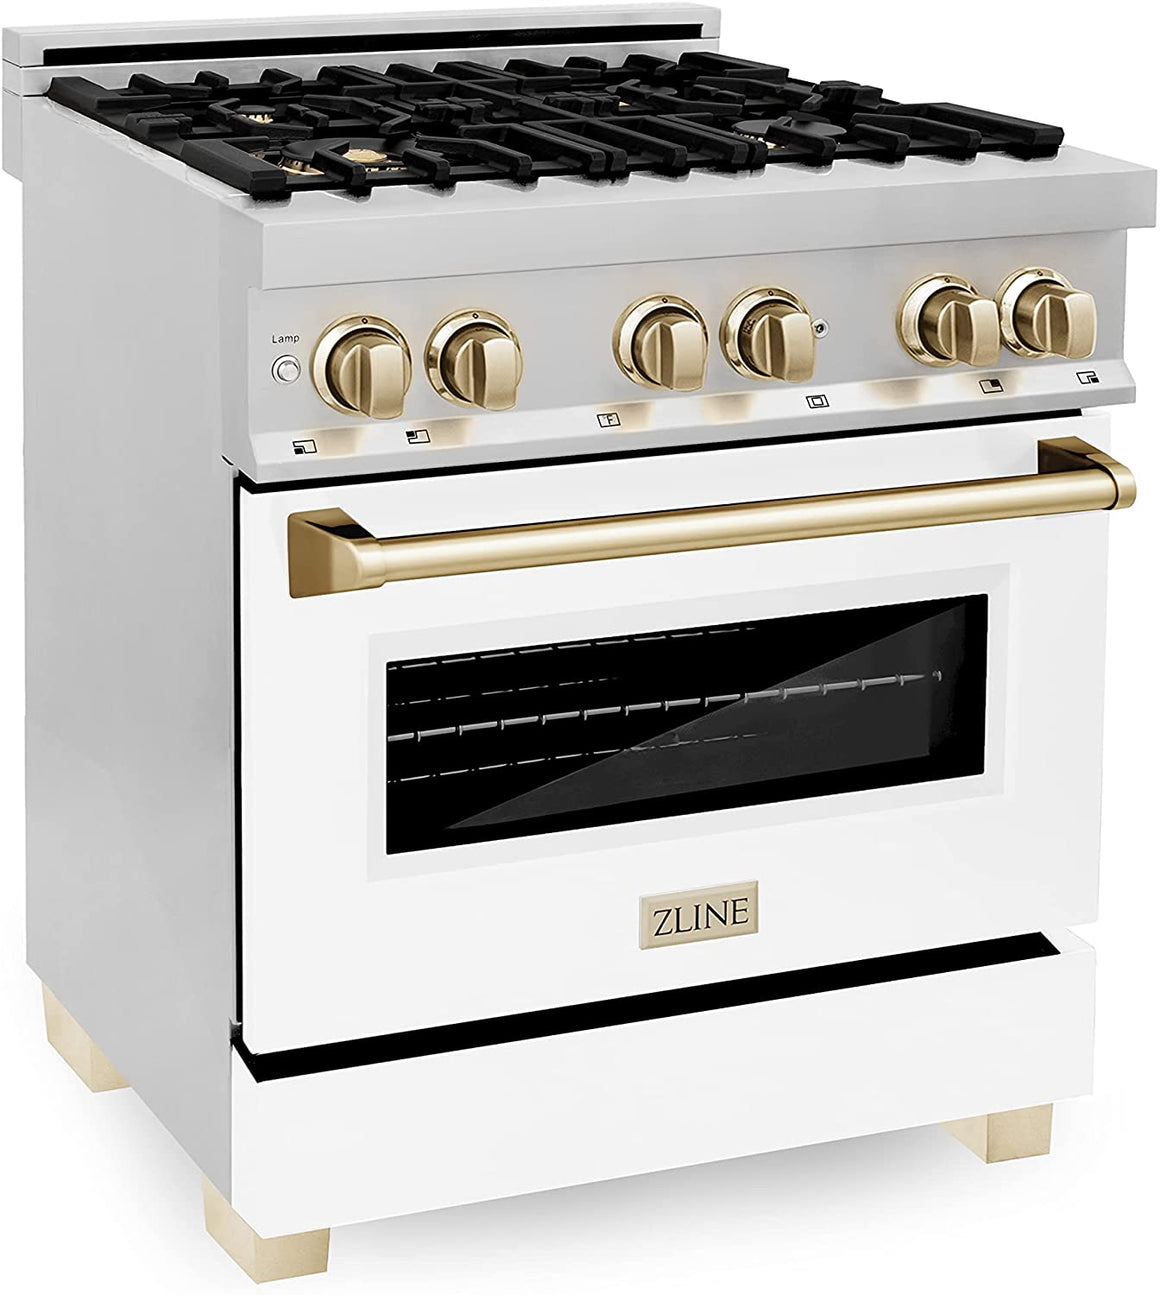 ZLINE Autograph Edition 30" 4.0 cu. ft. Dual Fuel Range with Gas Stove and Electric Oven in Stainless Steel with White Matte Door and Gold Accents